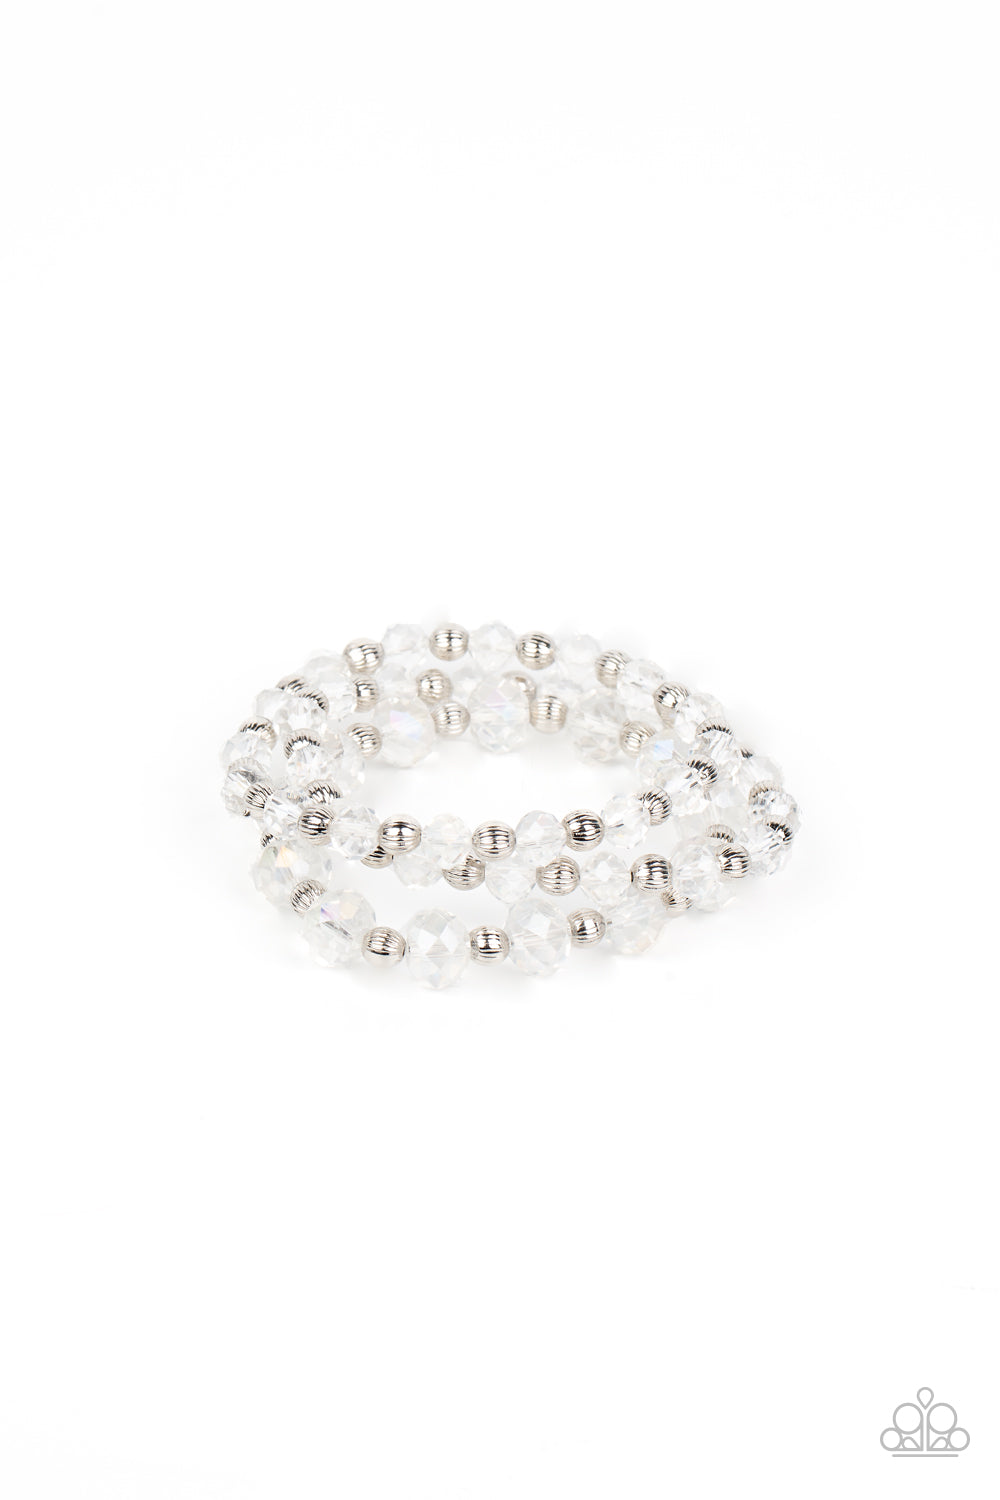 Eiffel Tower Tryst - White Iridescent Crystal Gem Bracelets - Paparazzi Accessories - 
Varying in size, an explosion of glassy iridescent crystal-like gems and ornate silver beads are threaded along stretchy bands around the wrist for a glamorous fashion.
Sold as one set of three bracelets.
